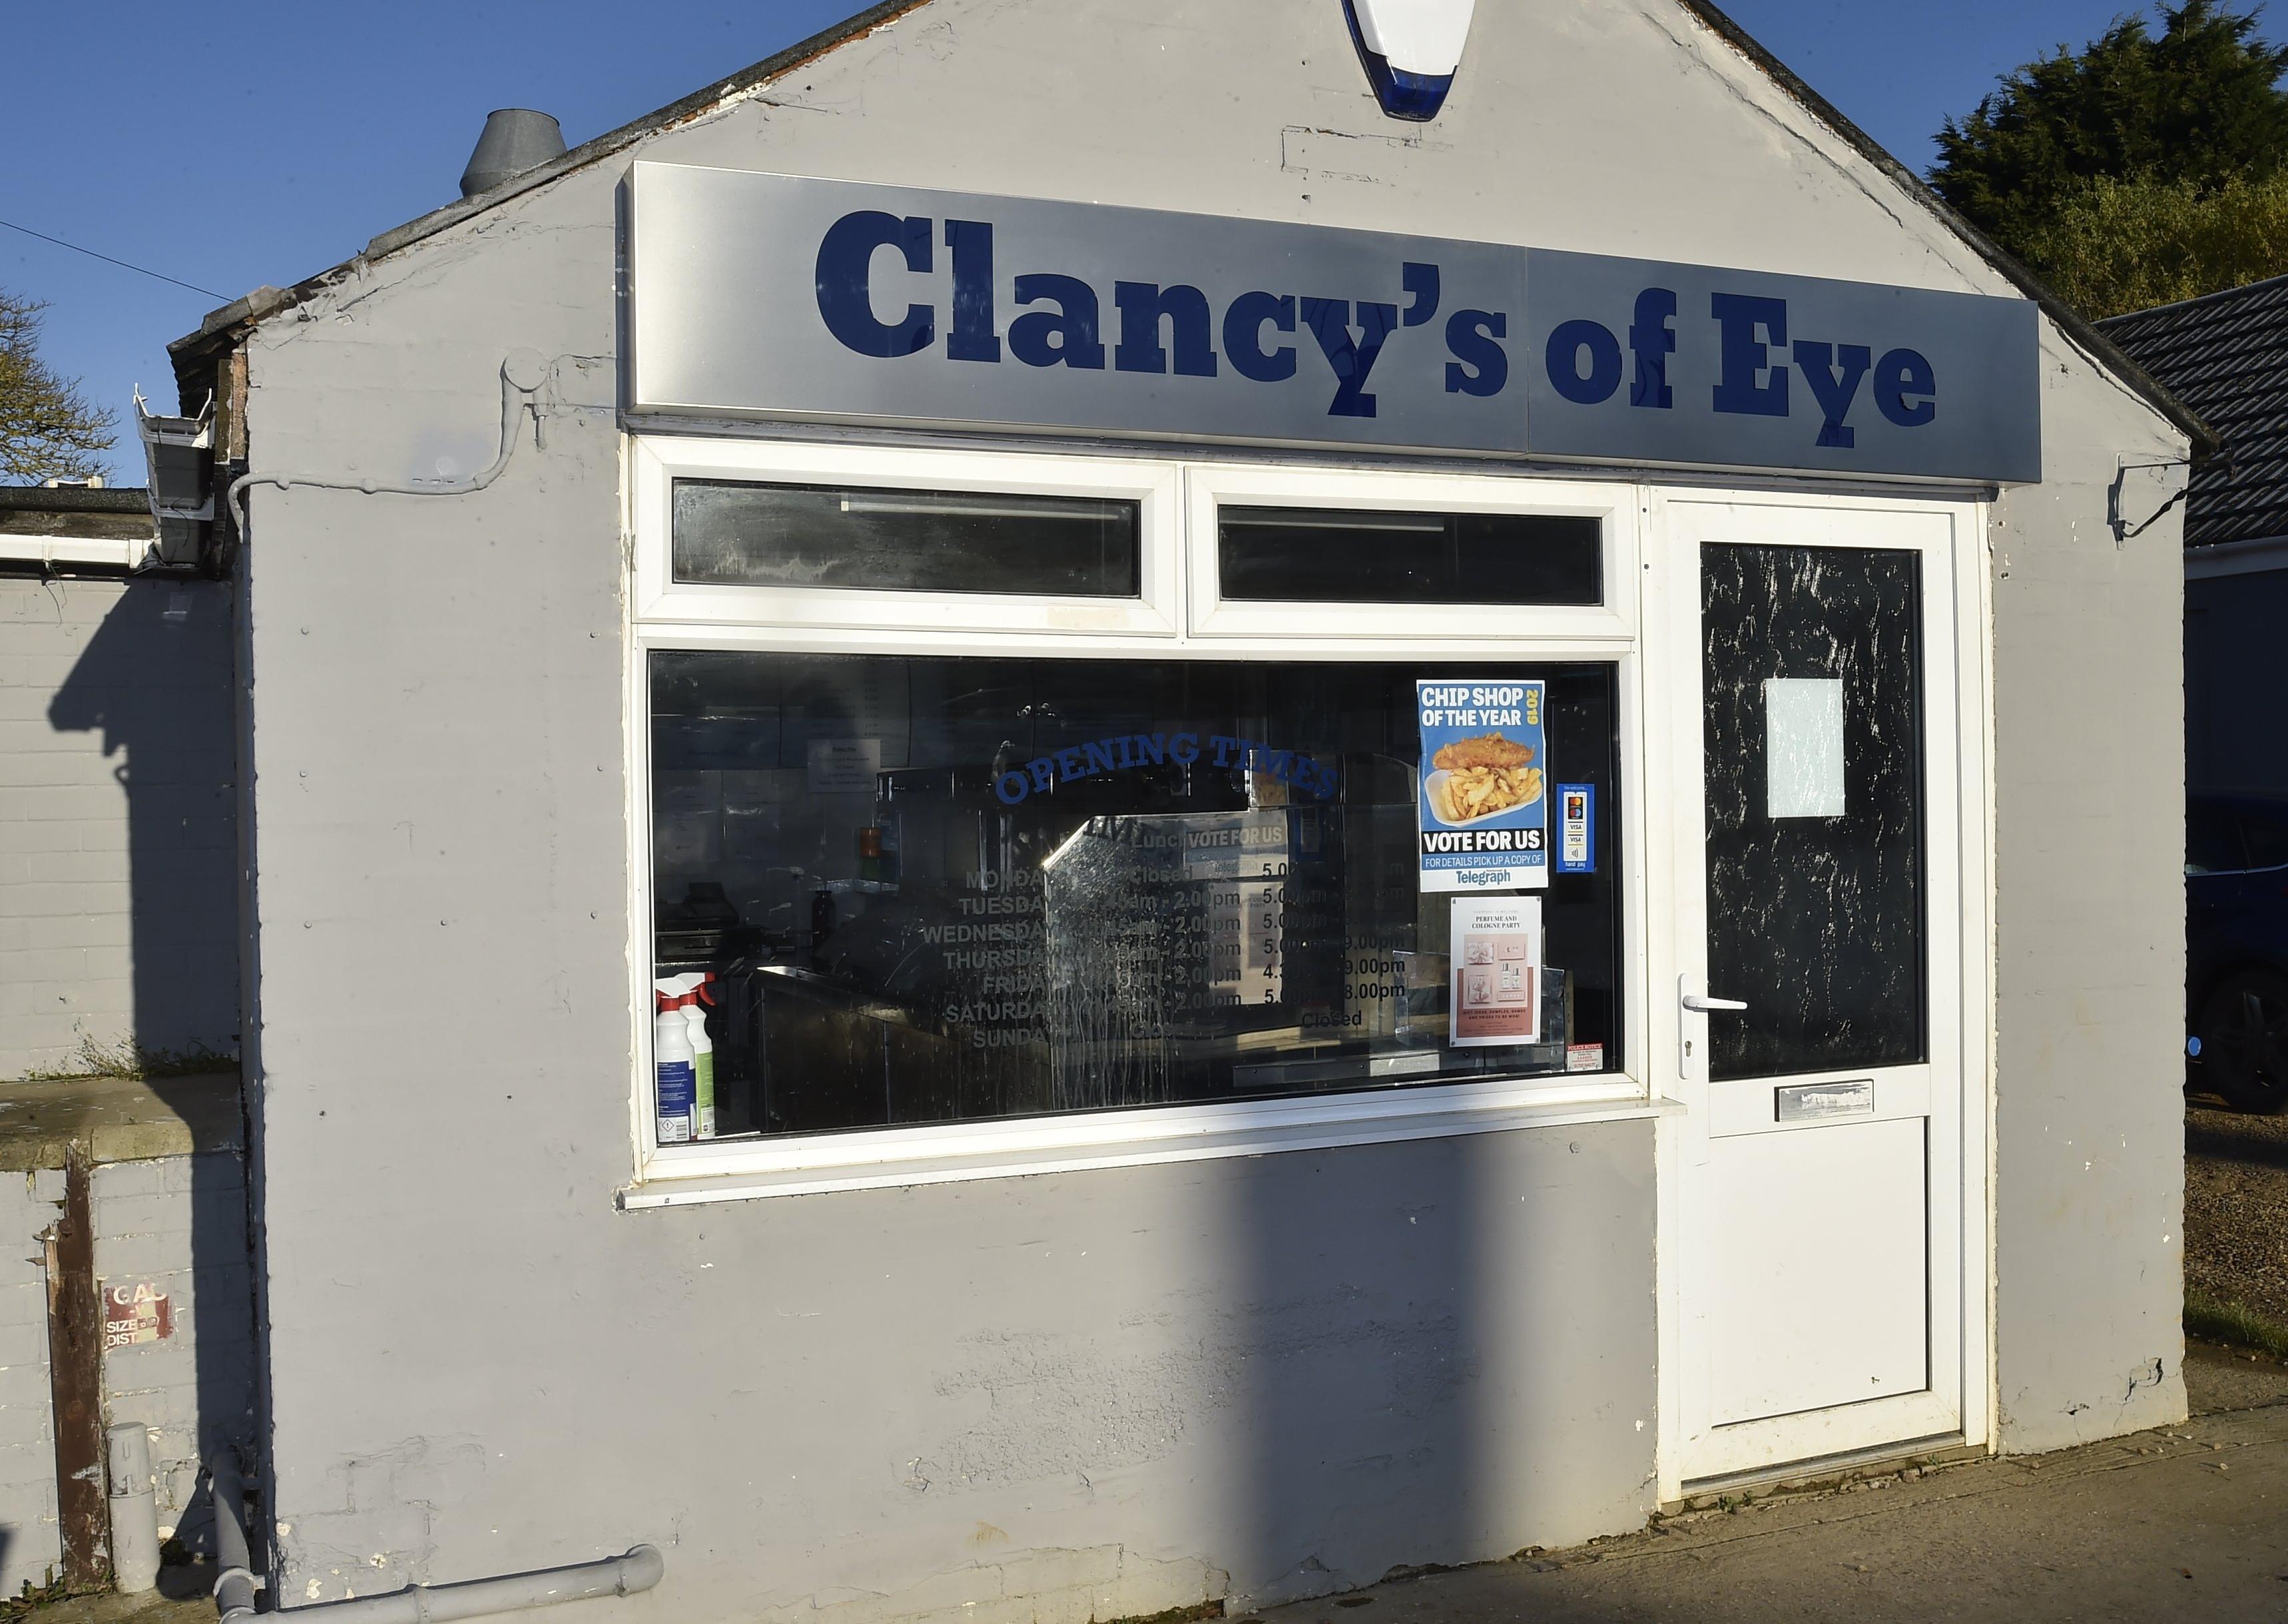 PT Chip Shop of the Year nominees. Clancy's of Eye. EMN-190212-170748009